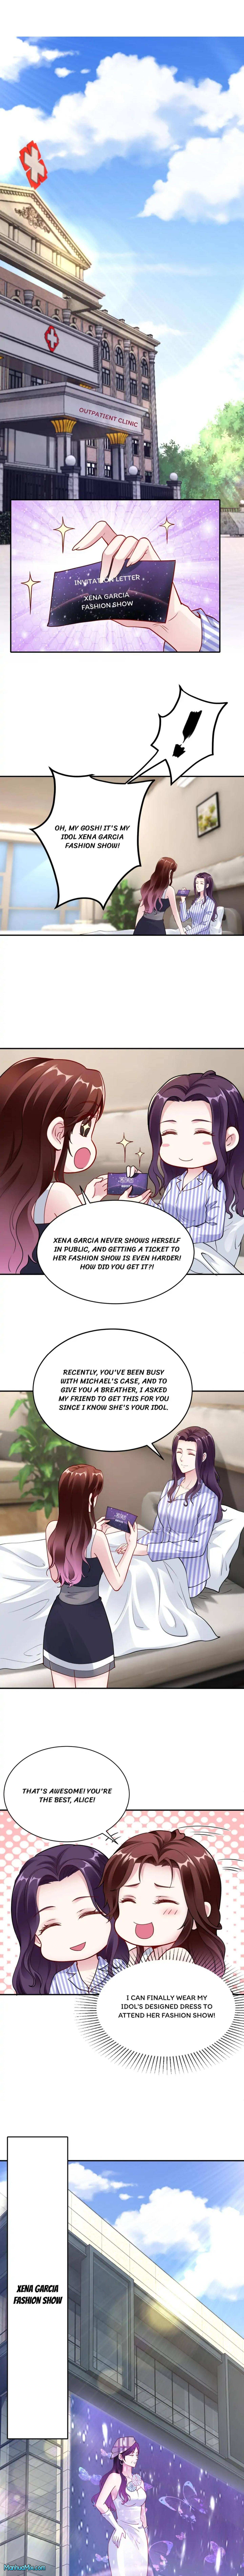 Ms. Social Butterfly - Page 1